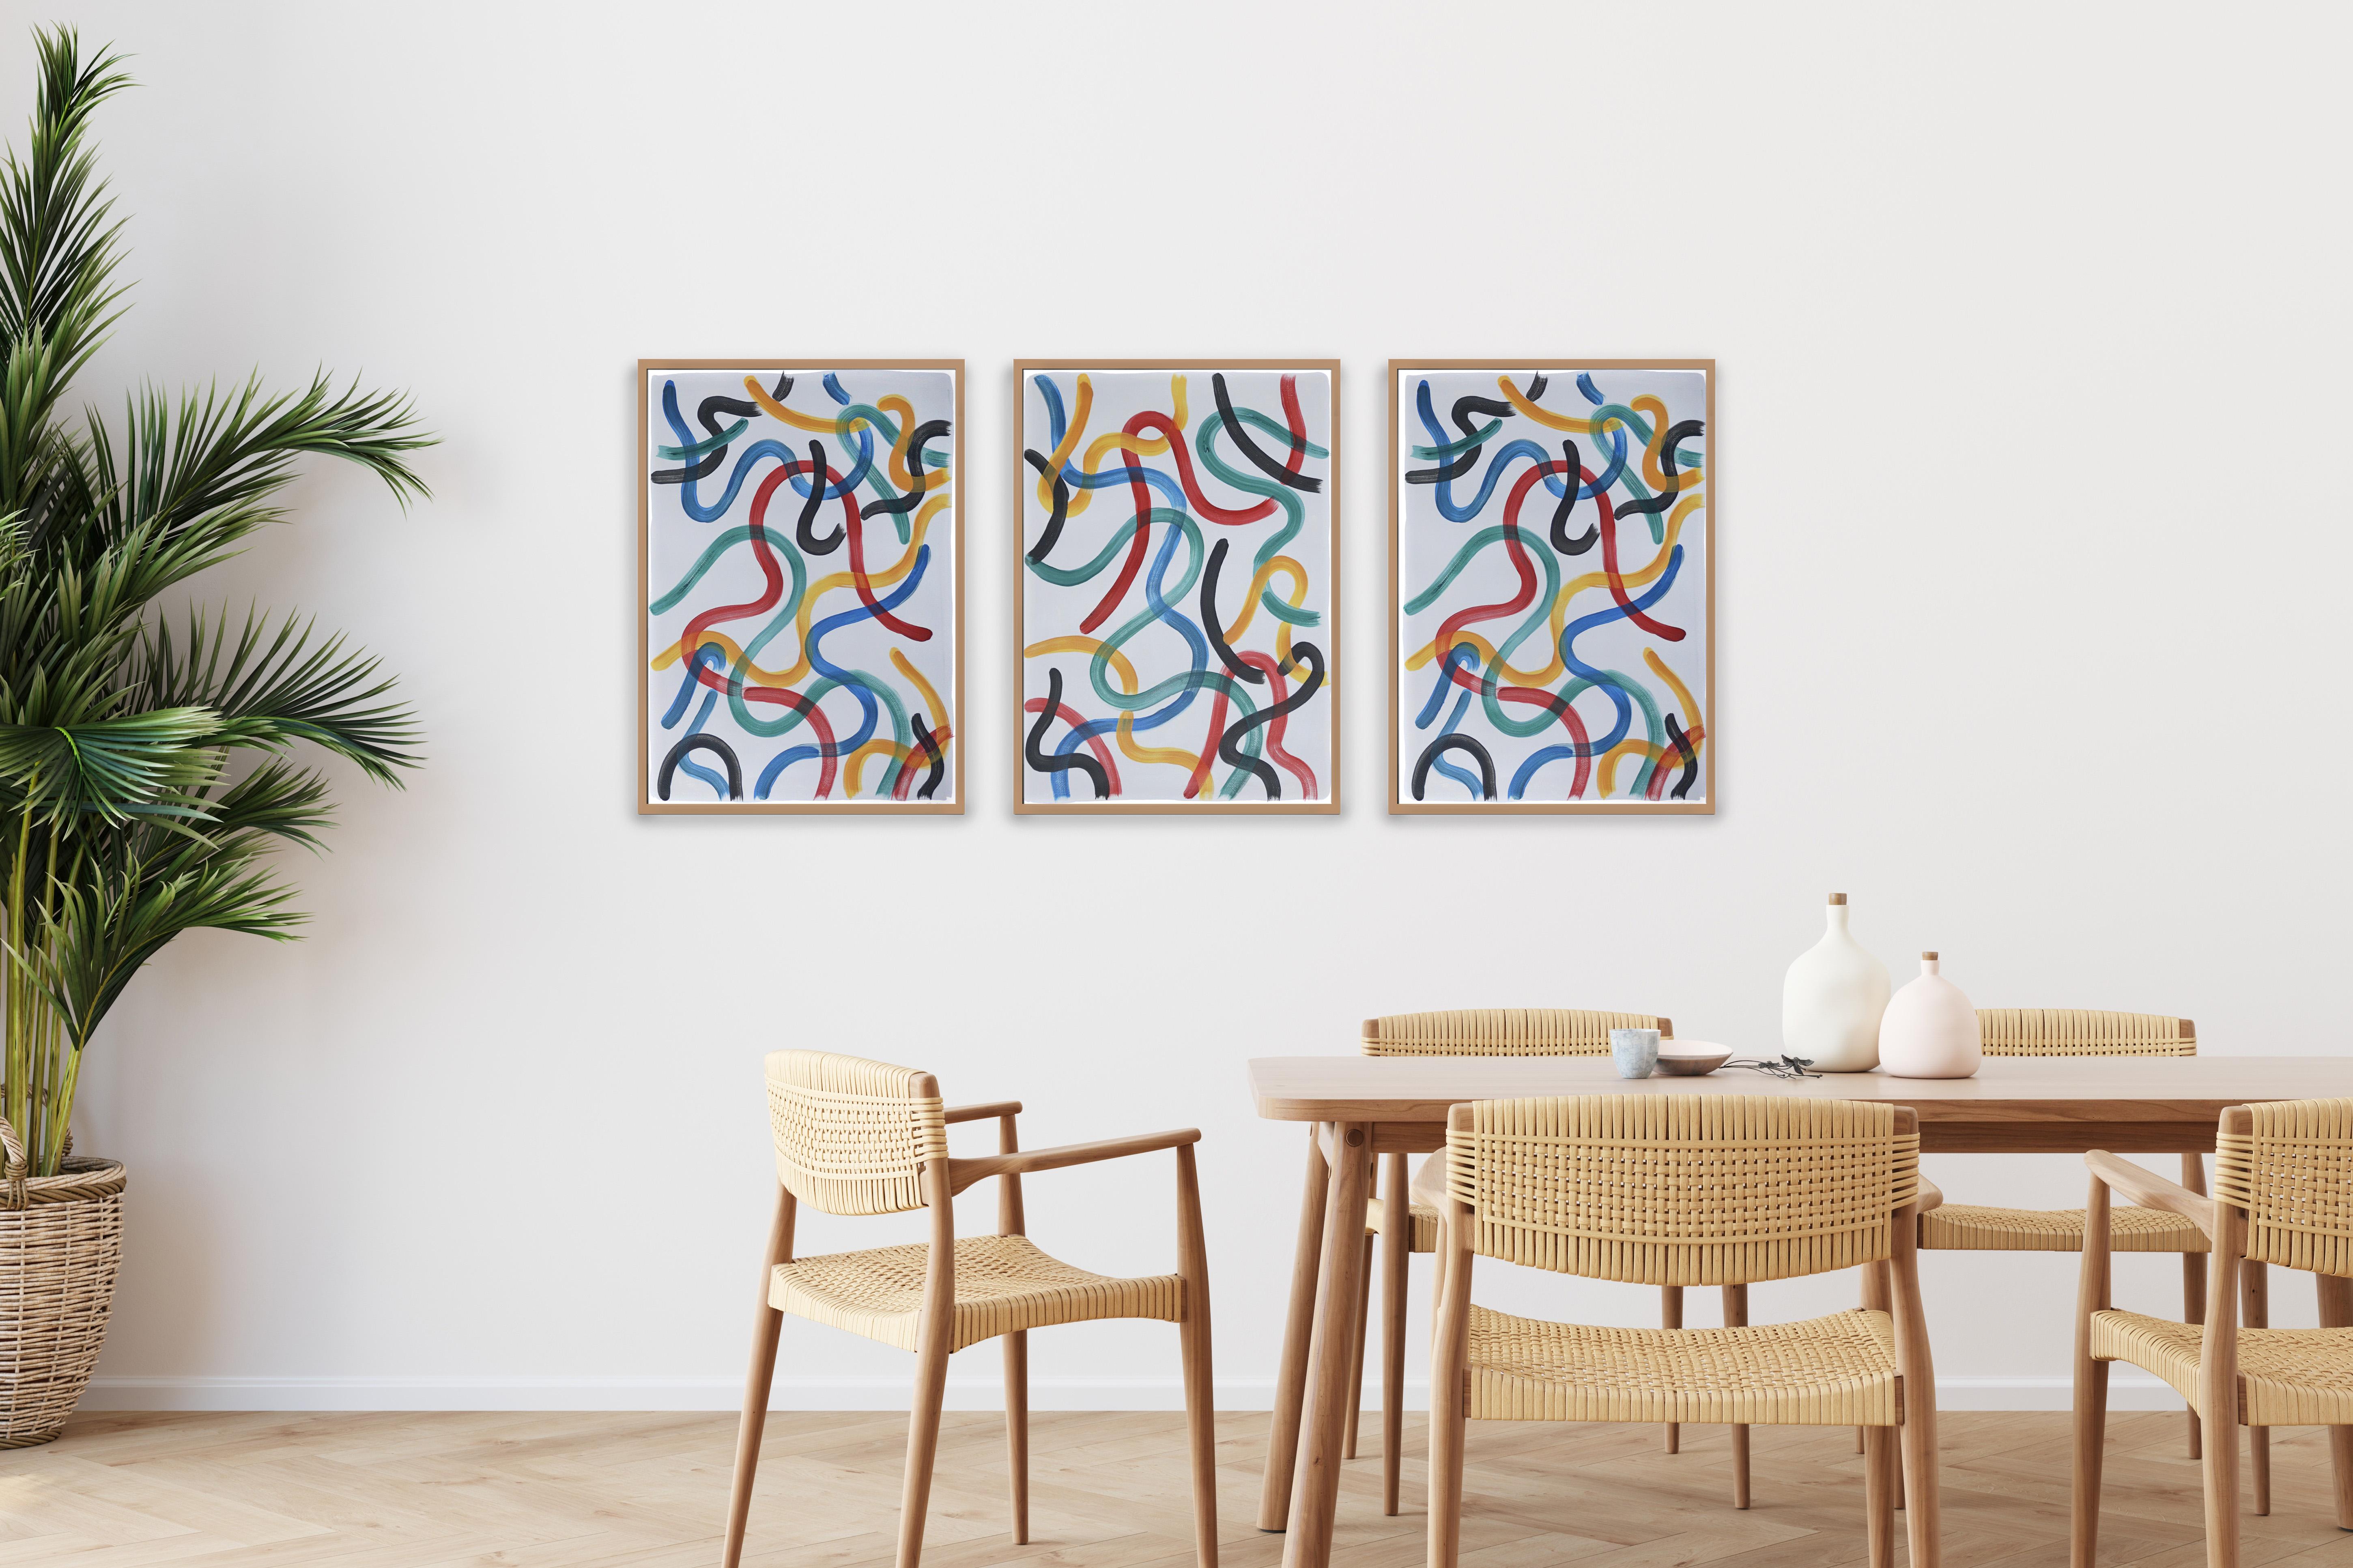 Primary Swirls on Neutral Gray, Abstract Brush Strokes Gestures, Triptych, Red - Painting by Natalia Roman